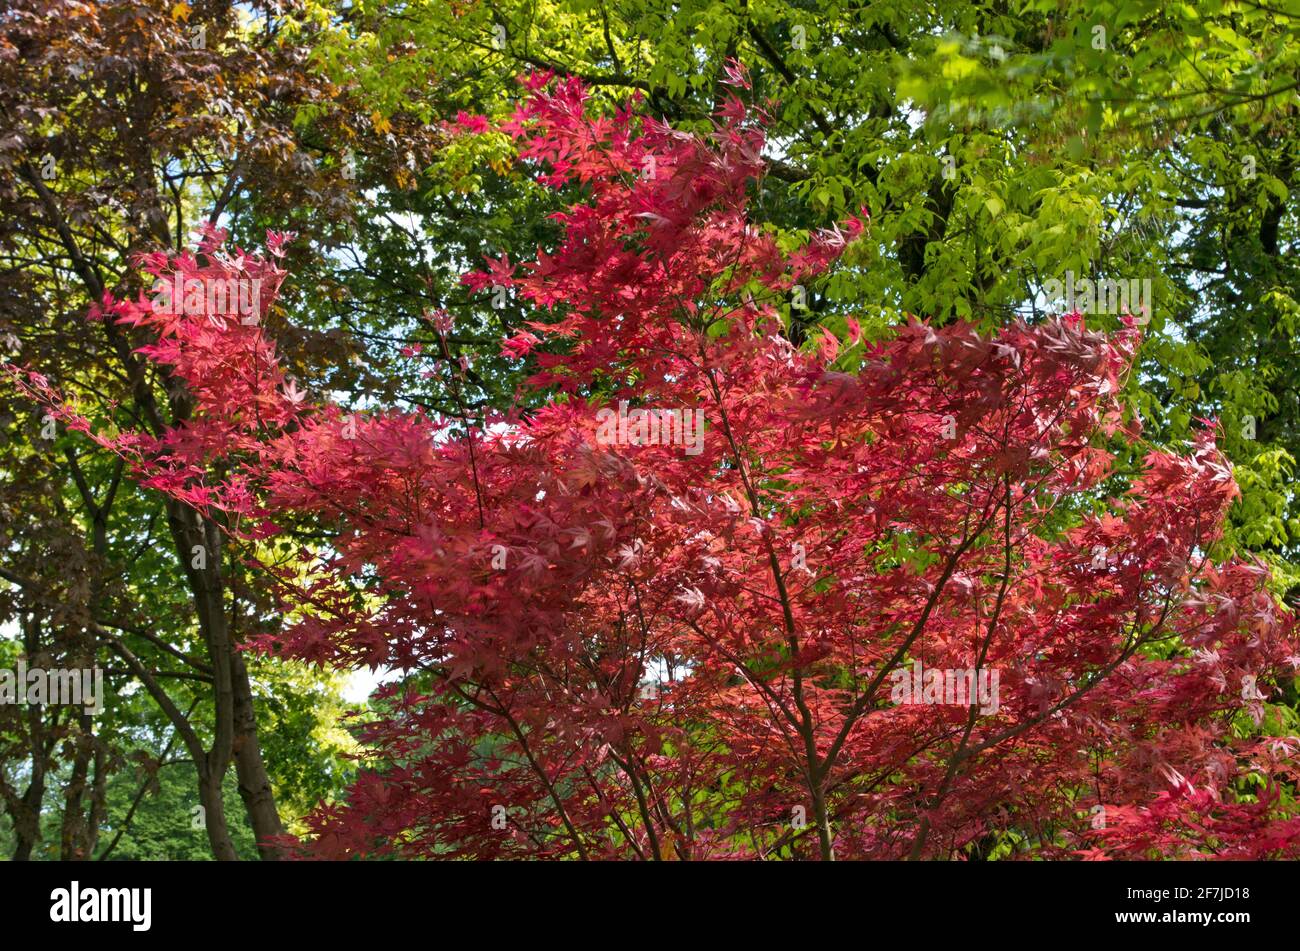 Japanese maple (Acer palmatum) with thin branches, with red-maroon carved openwork leaves shivering in a strong wind among the greenery of tall trees Stock Photo